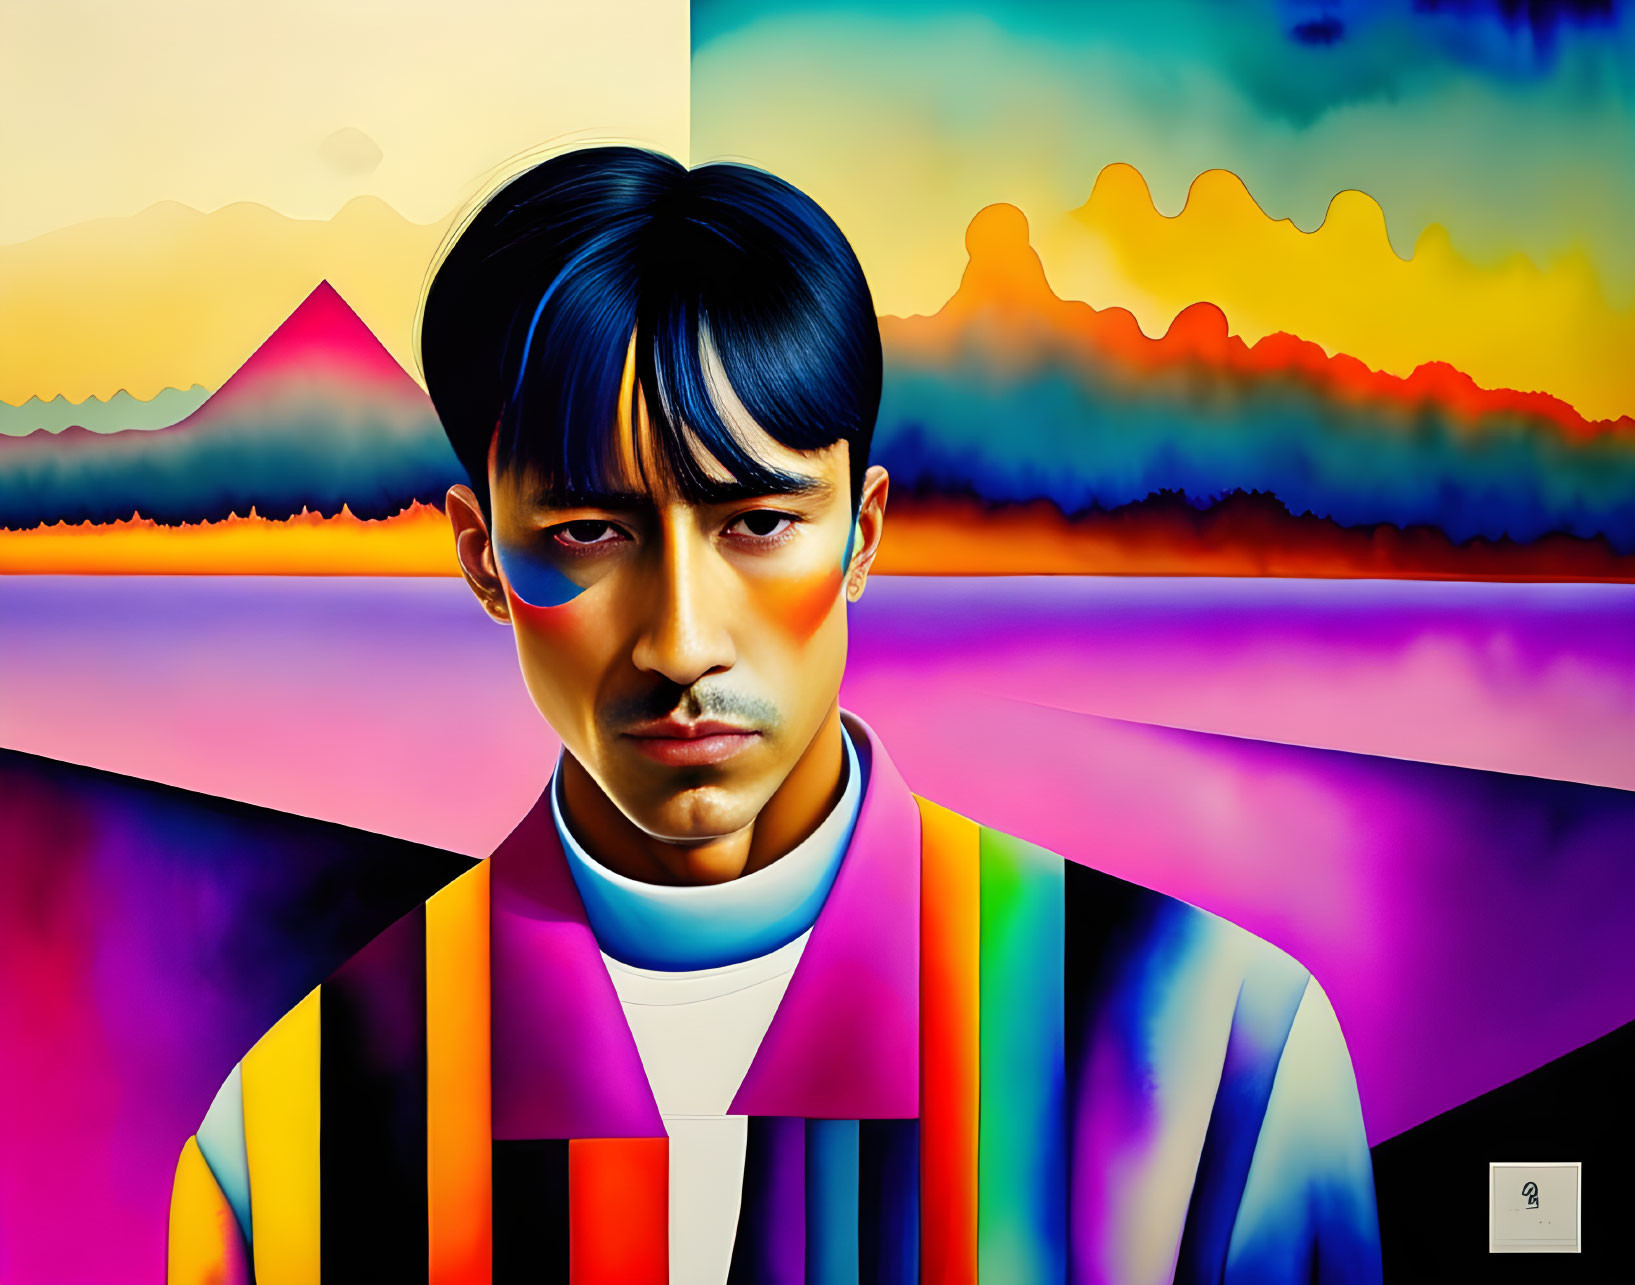 Colorful digital art portrait of a man against abstract pyramids landscape